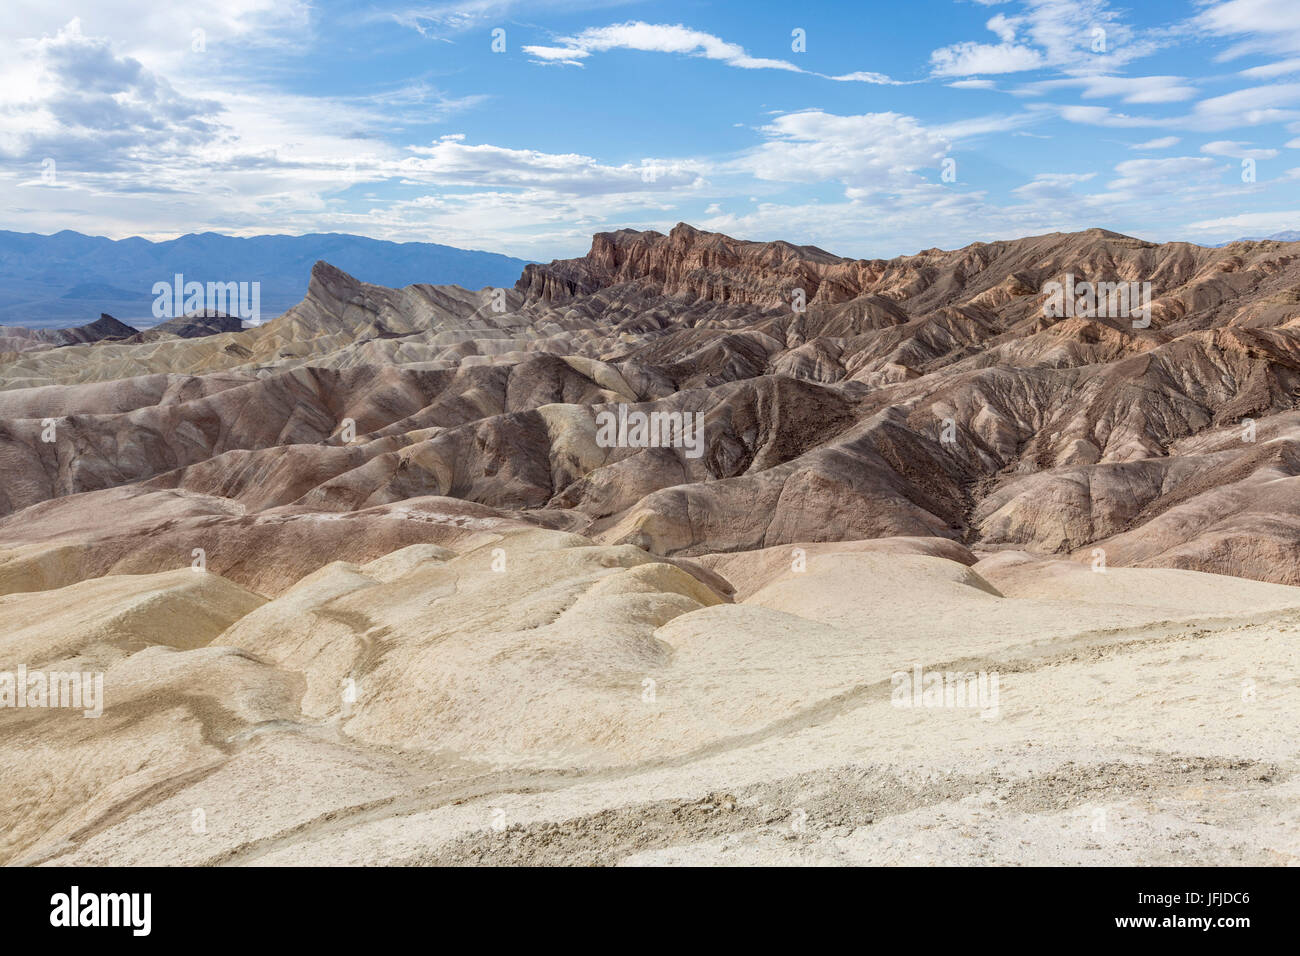 Landscape from Zabriskie Point, Death Valley National Park, Inyo County, California, USA, Stock Photo